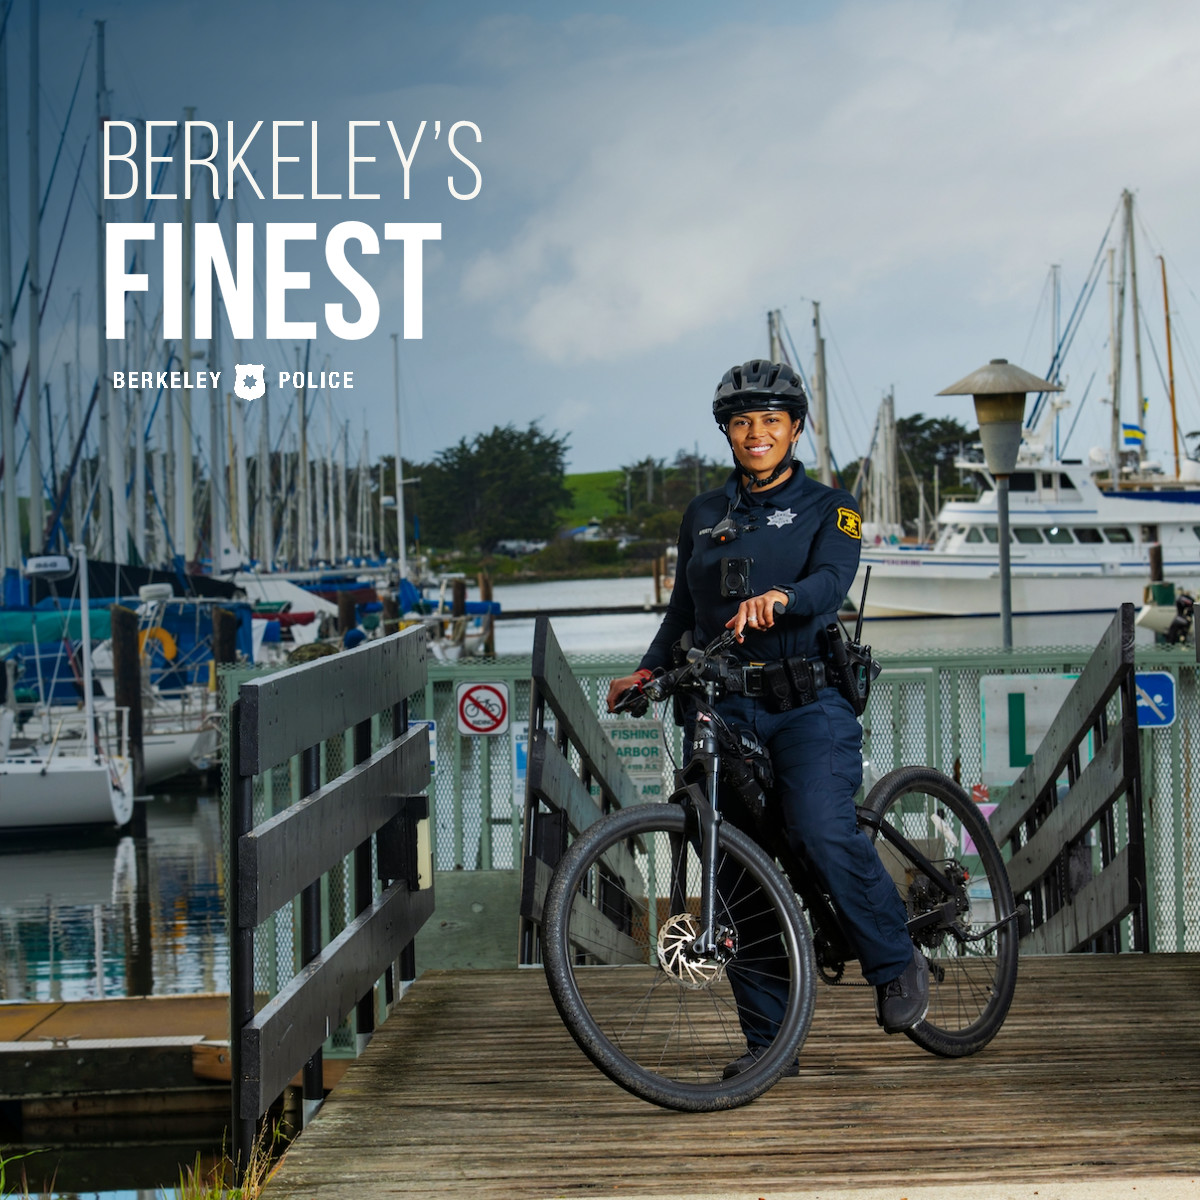 The heart and soul of Berkeley is its people. With all different backgrounds and experiences, our badge is the common denominator. Join Berkeley's finest when you join Berkeley PD. #BerkeleyPD #bikepatrol #mountainbiking